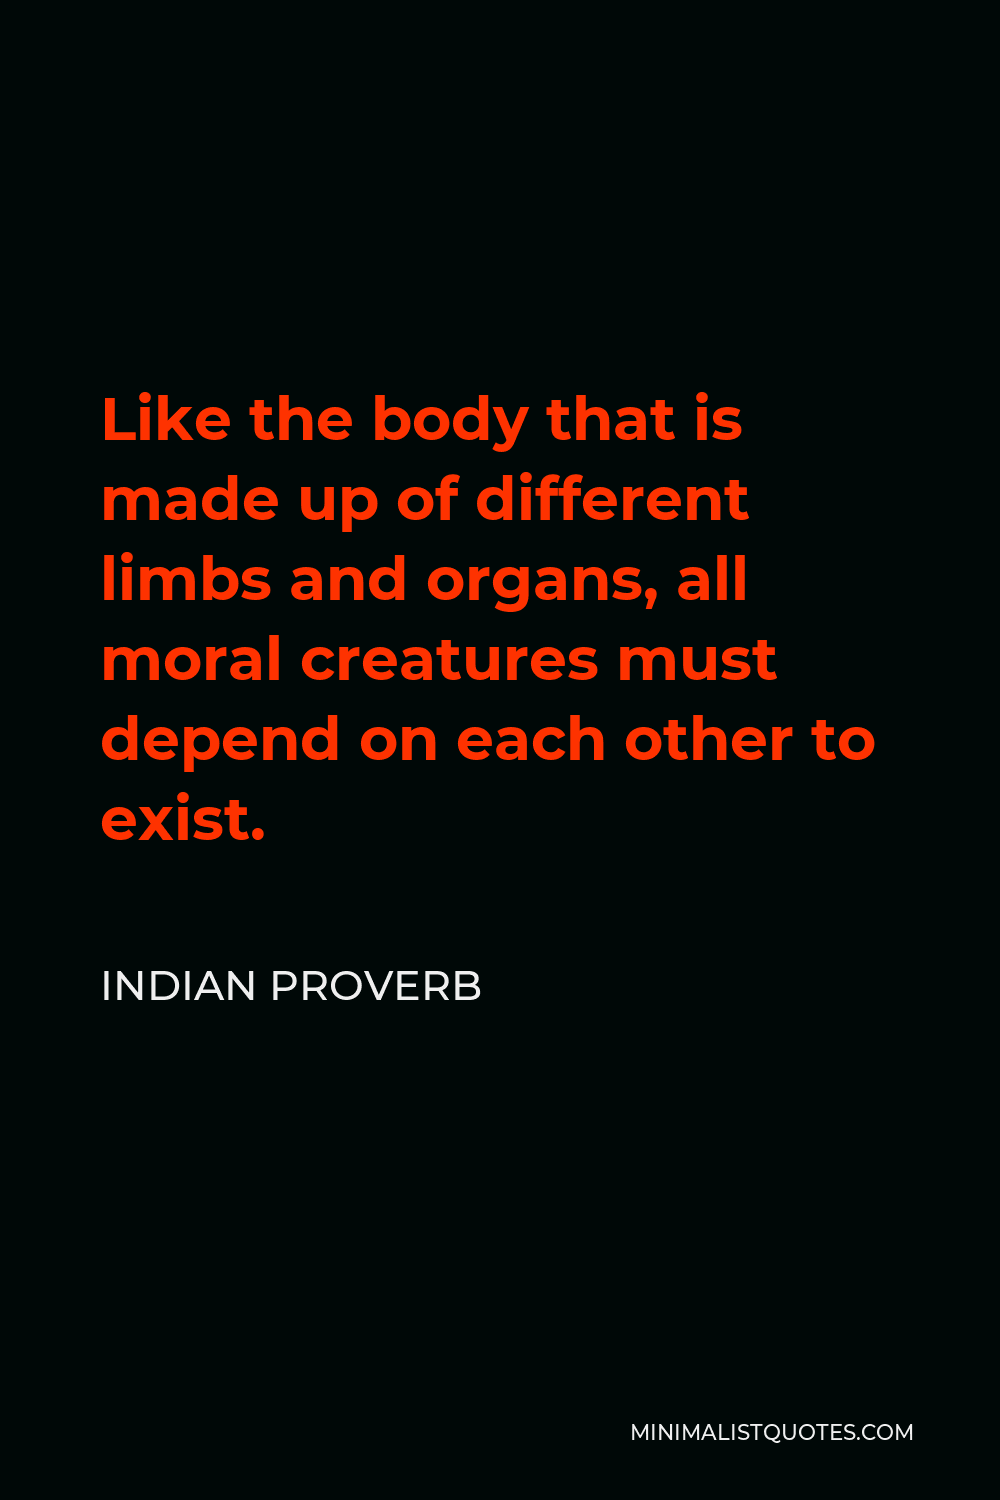 Indian Proverb Quote - Like the body that is made up of different limbs and organs, all moral creatures must depend on each other to exist.